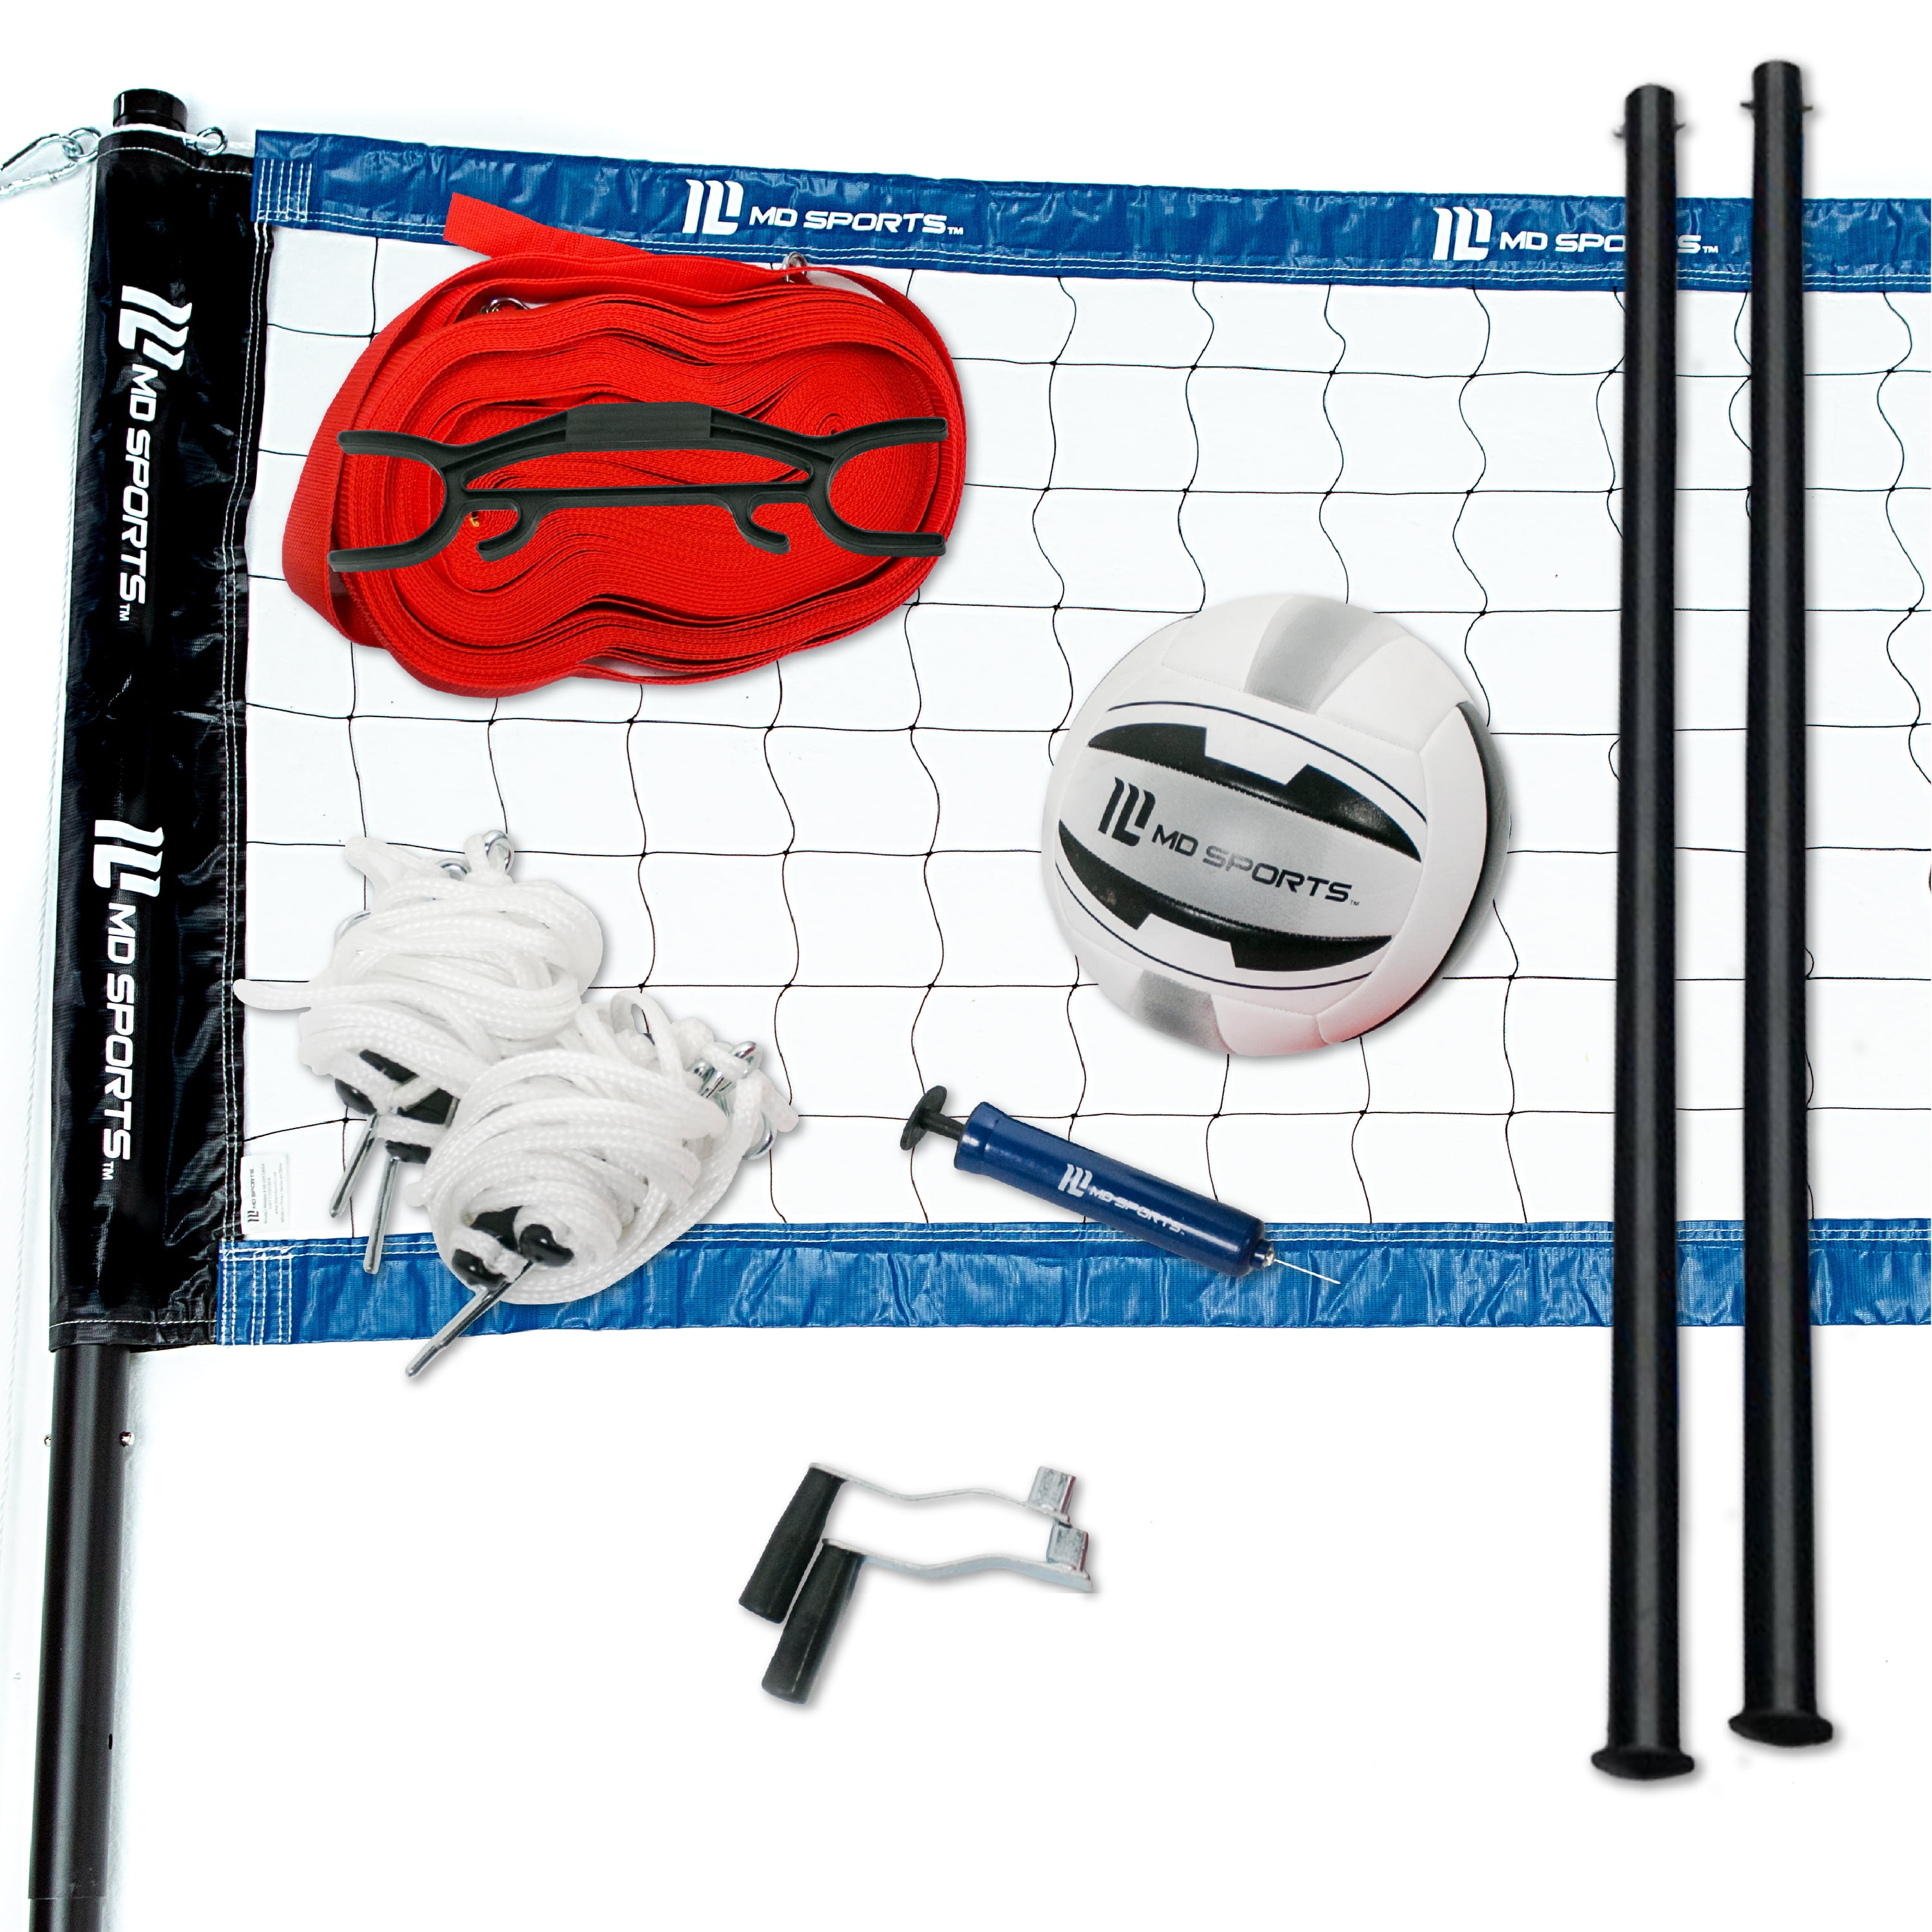 Volleyball Net Standard Size Volleyball Net With Storage Bag Volleyball Net For 